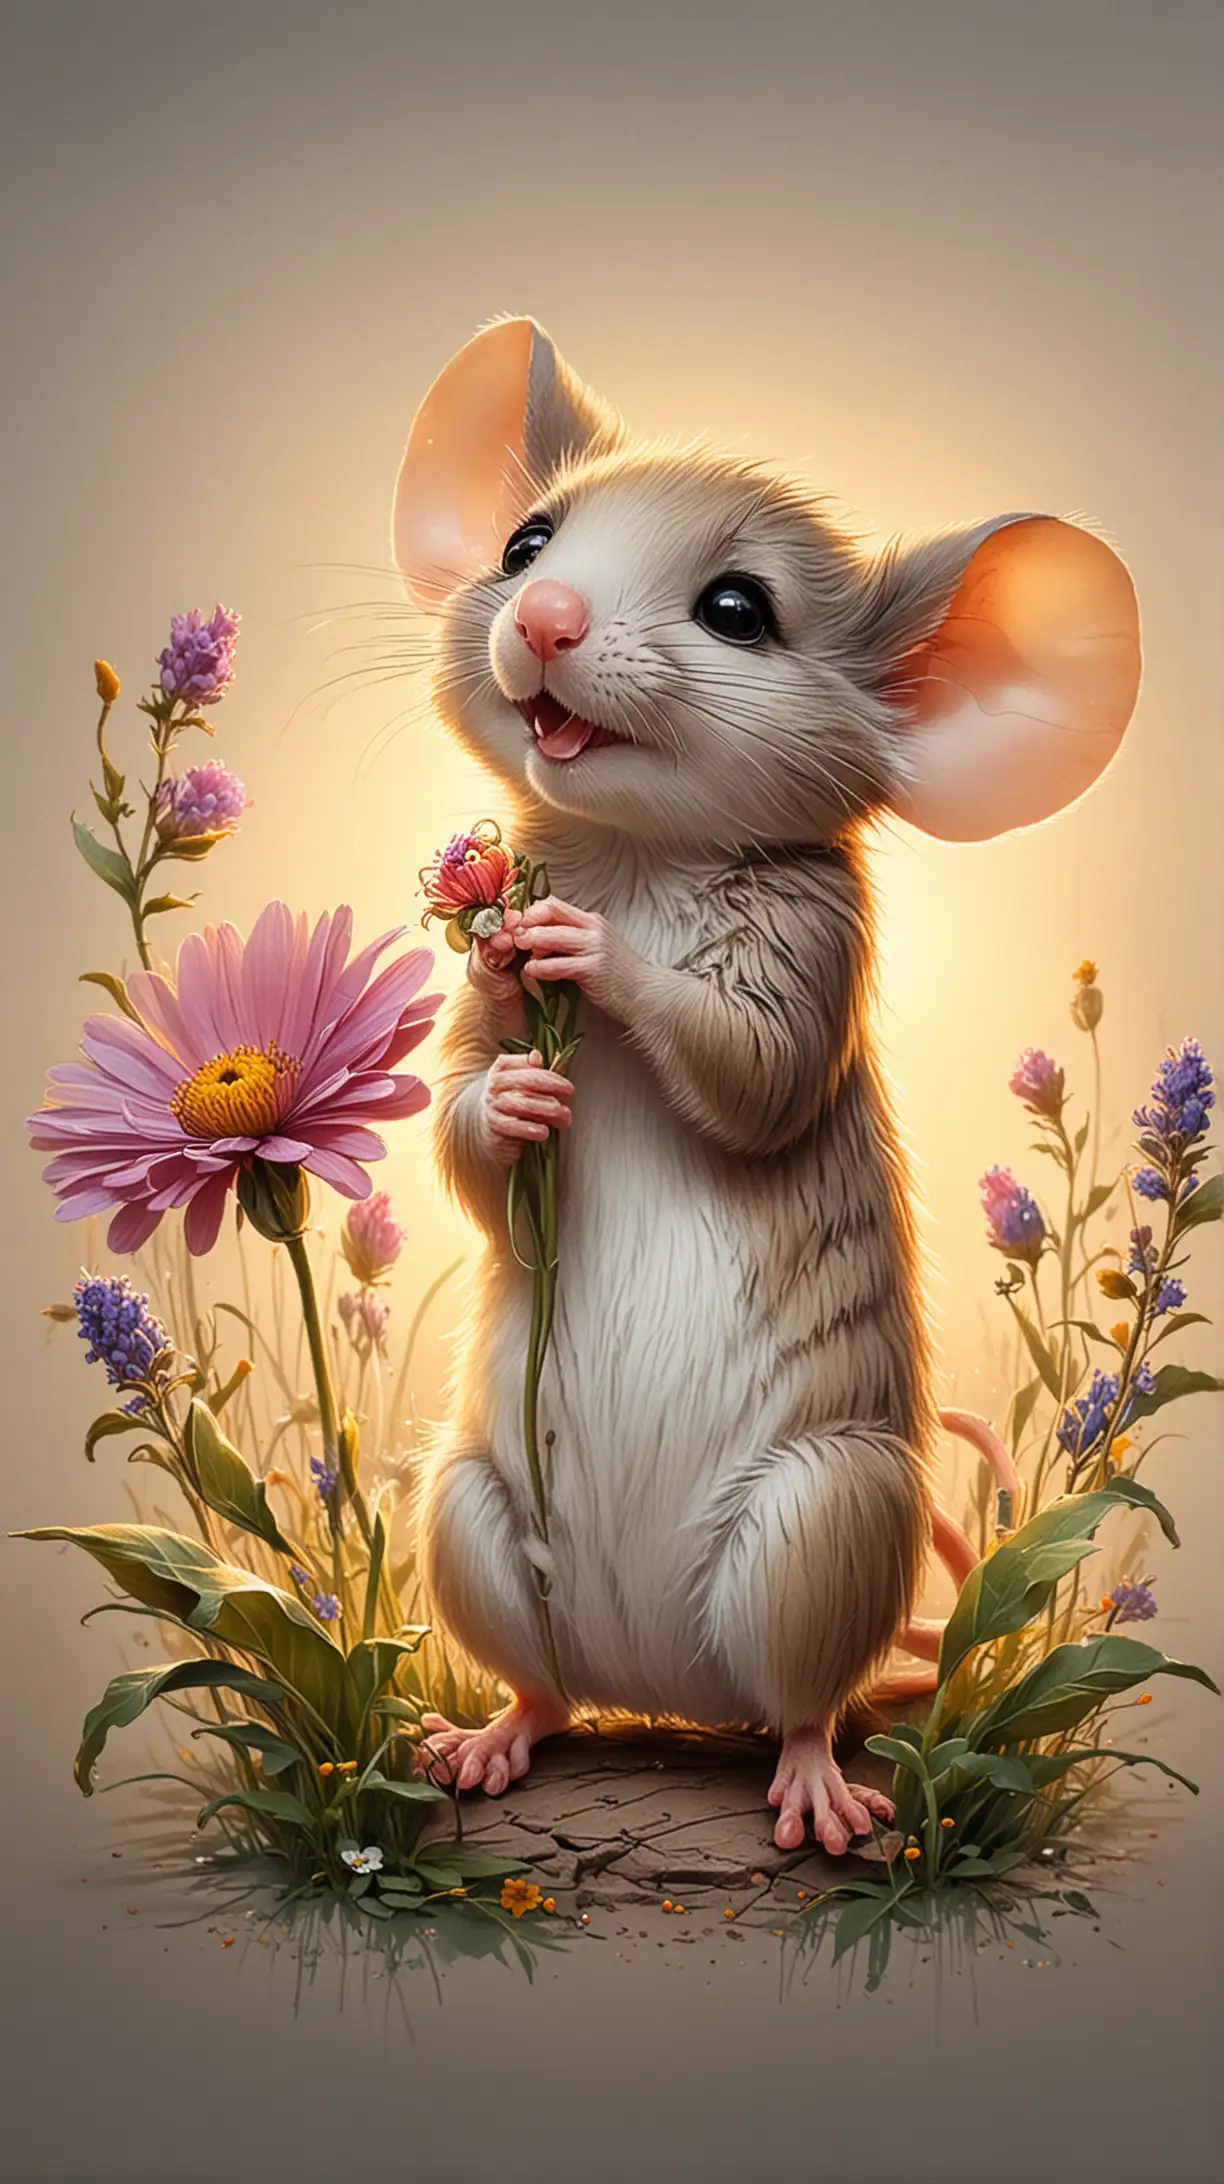 Friendly Mouse Offering a Wildflower at Sunrise